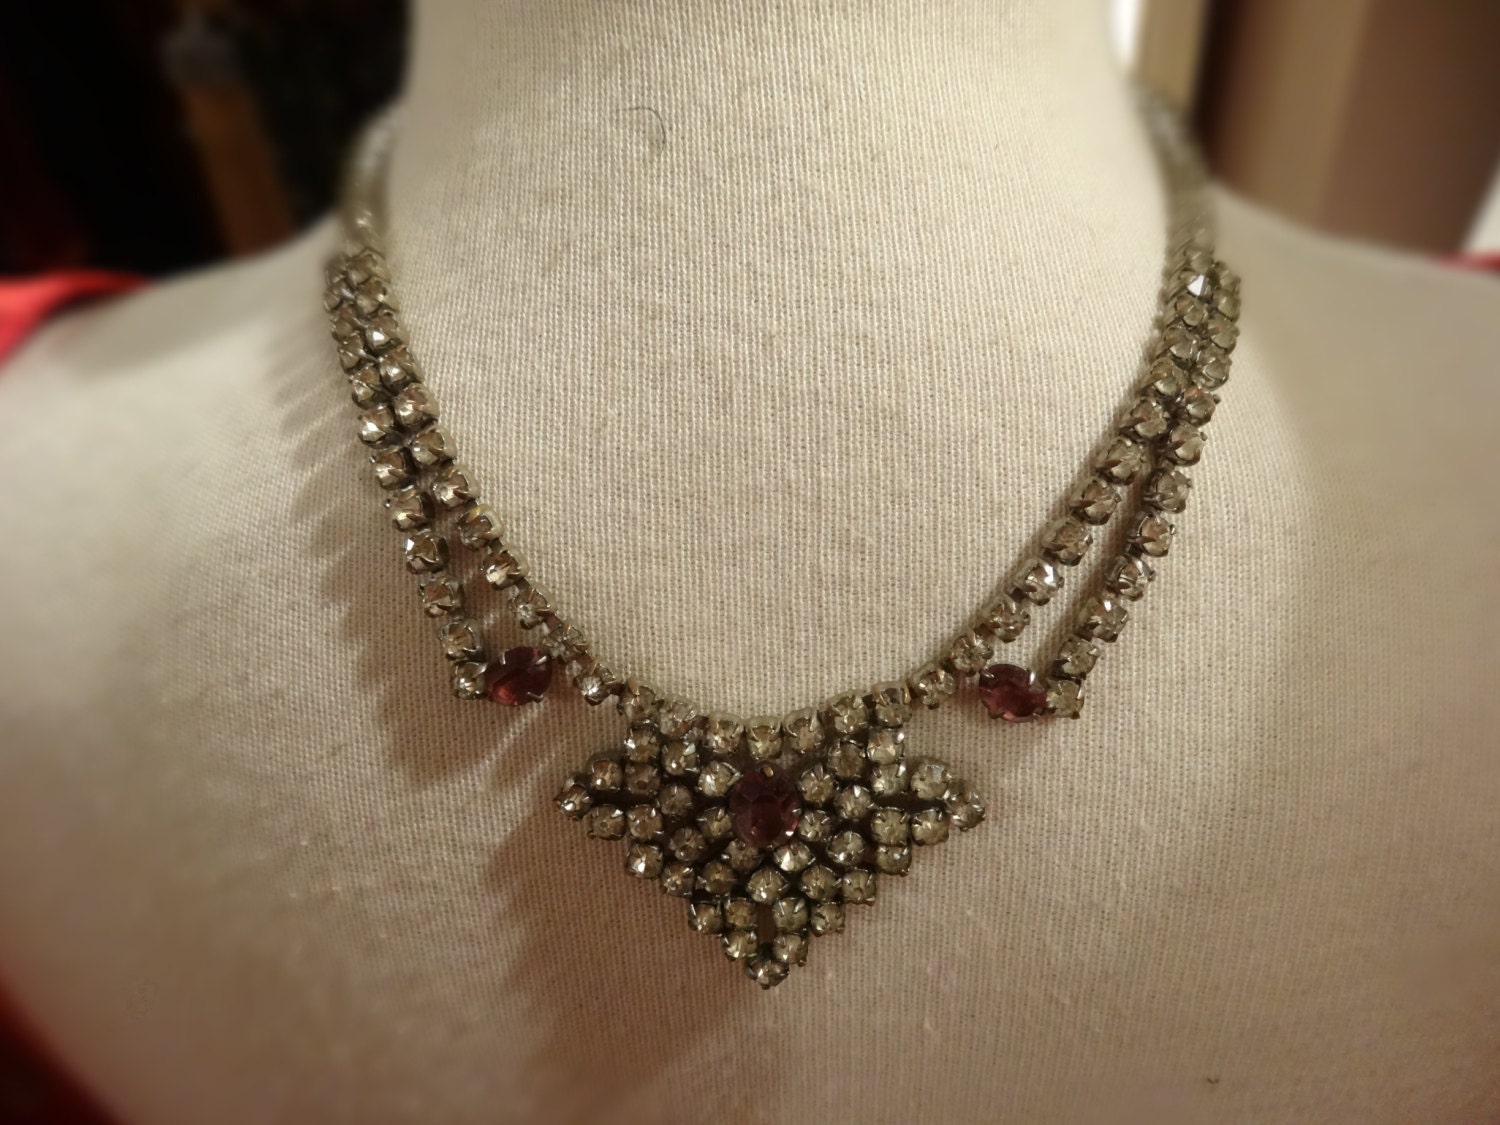 Vintage 1930s Necklace Art Deco by PepperLaneExclusives on Etsy